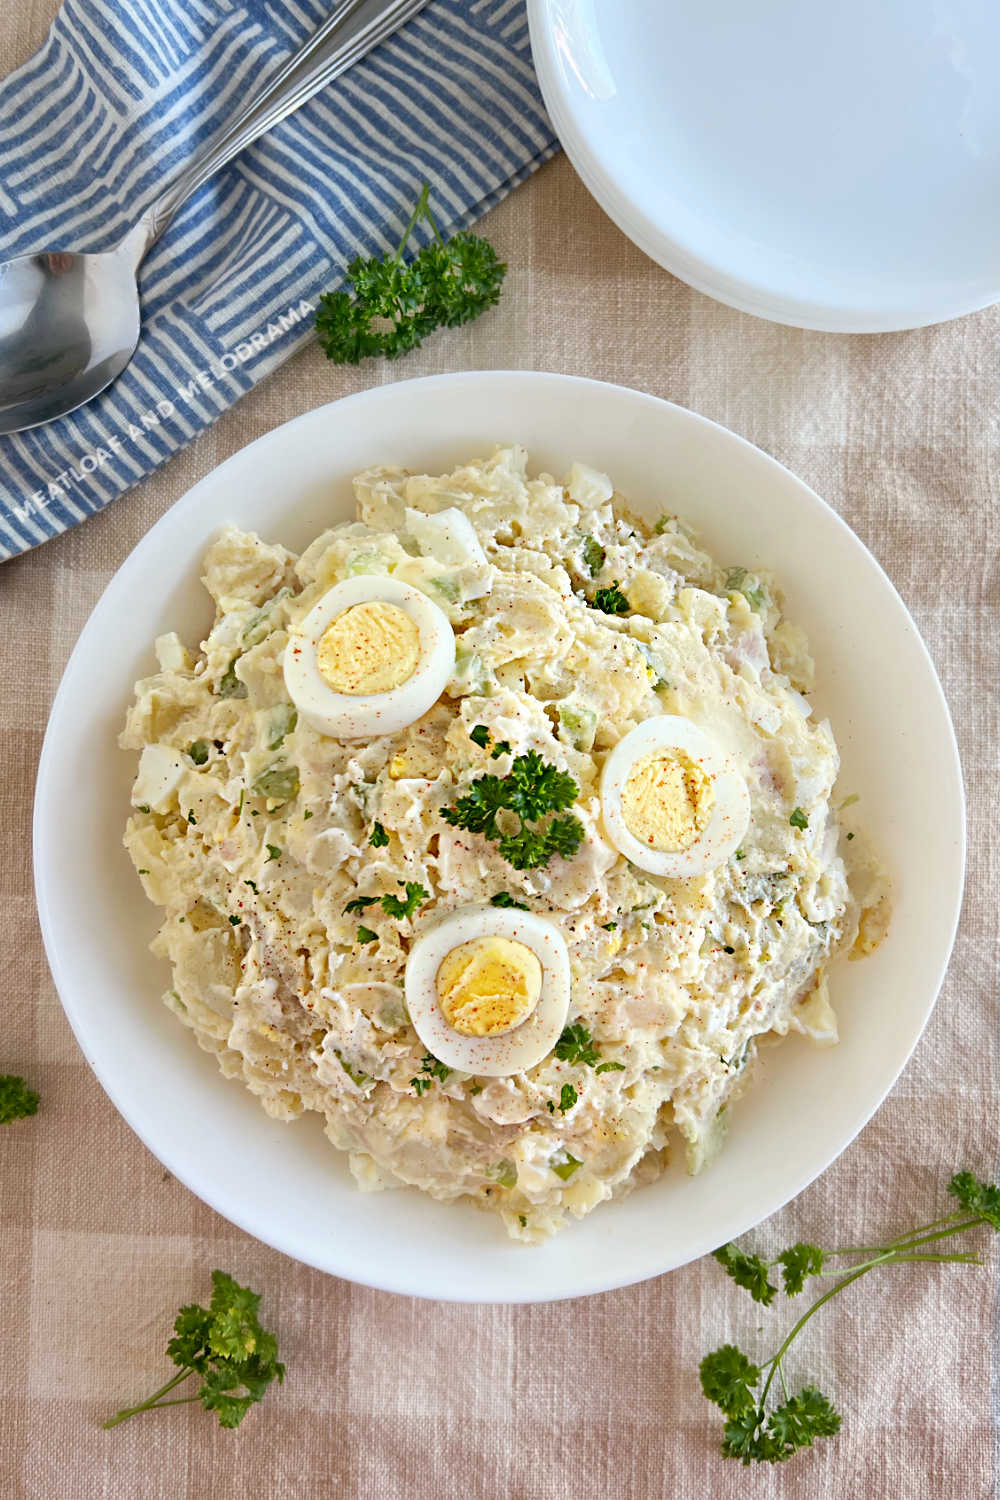 grandma's potato salad with sliced hard boiled eggs in serving bowl